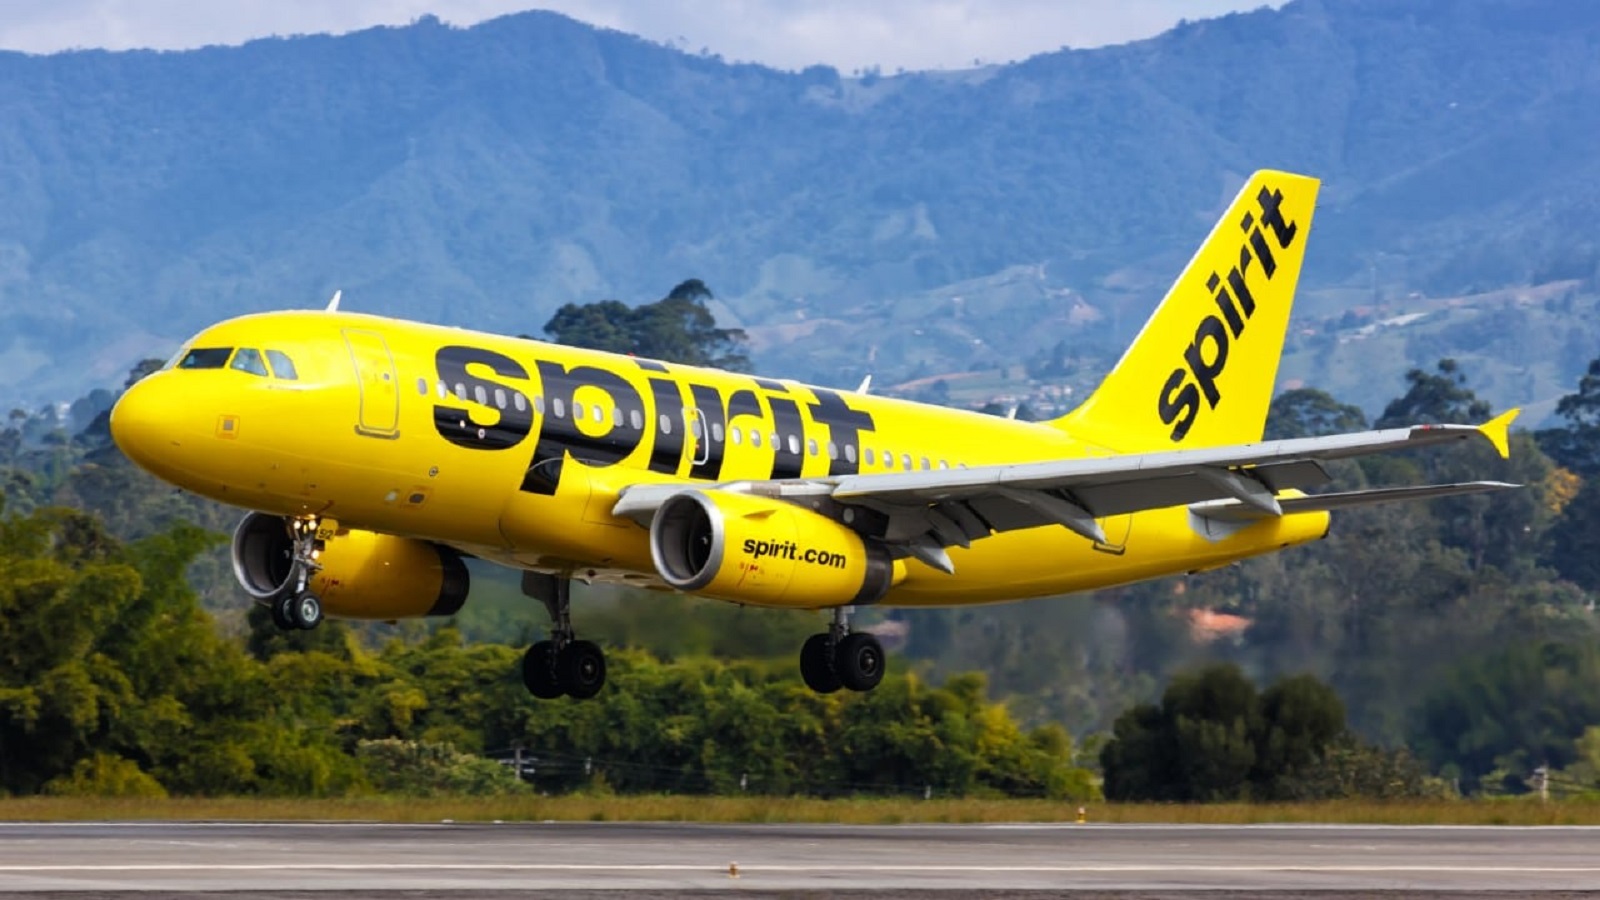 <p><span>Spirit Airlines has been a pioneer in the U.S. domestic airline industry, being the first to offer a model where passengers only pay for the specific features they use, such as checked bags and onboard services. This approach has forced other airlines to lower their prices to compete.</span></p>